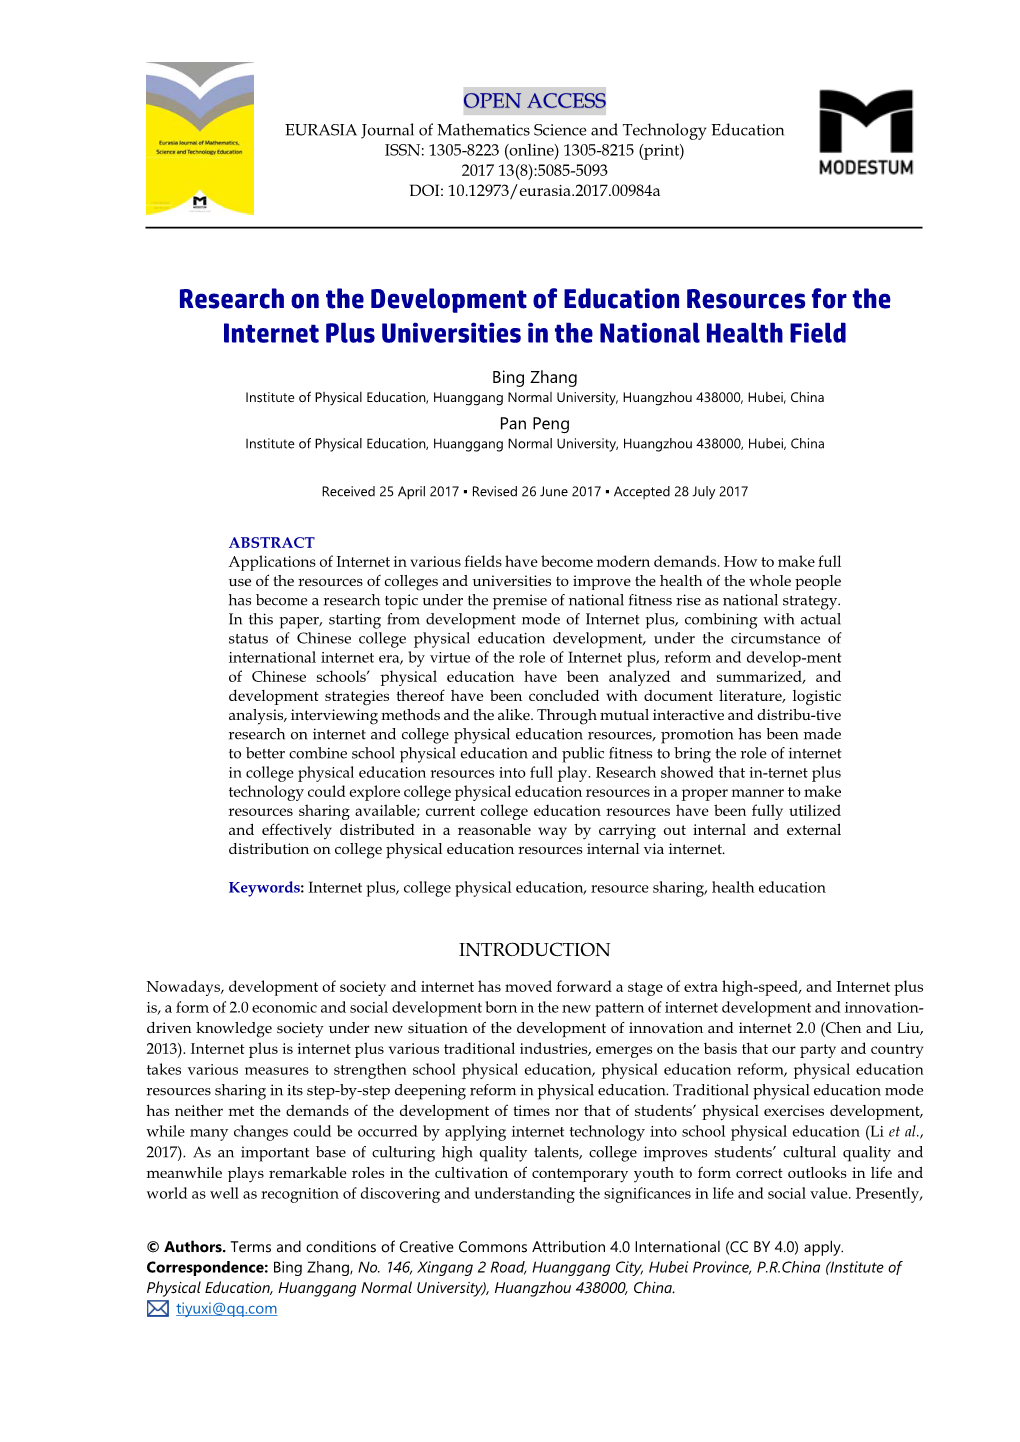 Research on the Development of Education Resources for the Internet Plus Universities in the National Health Field